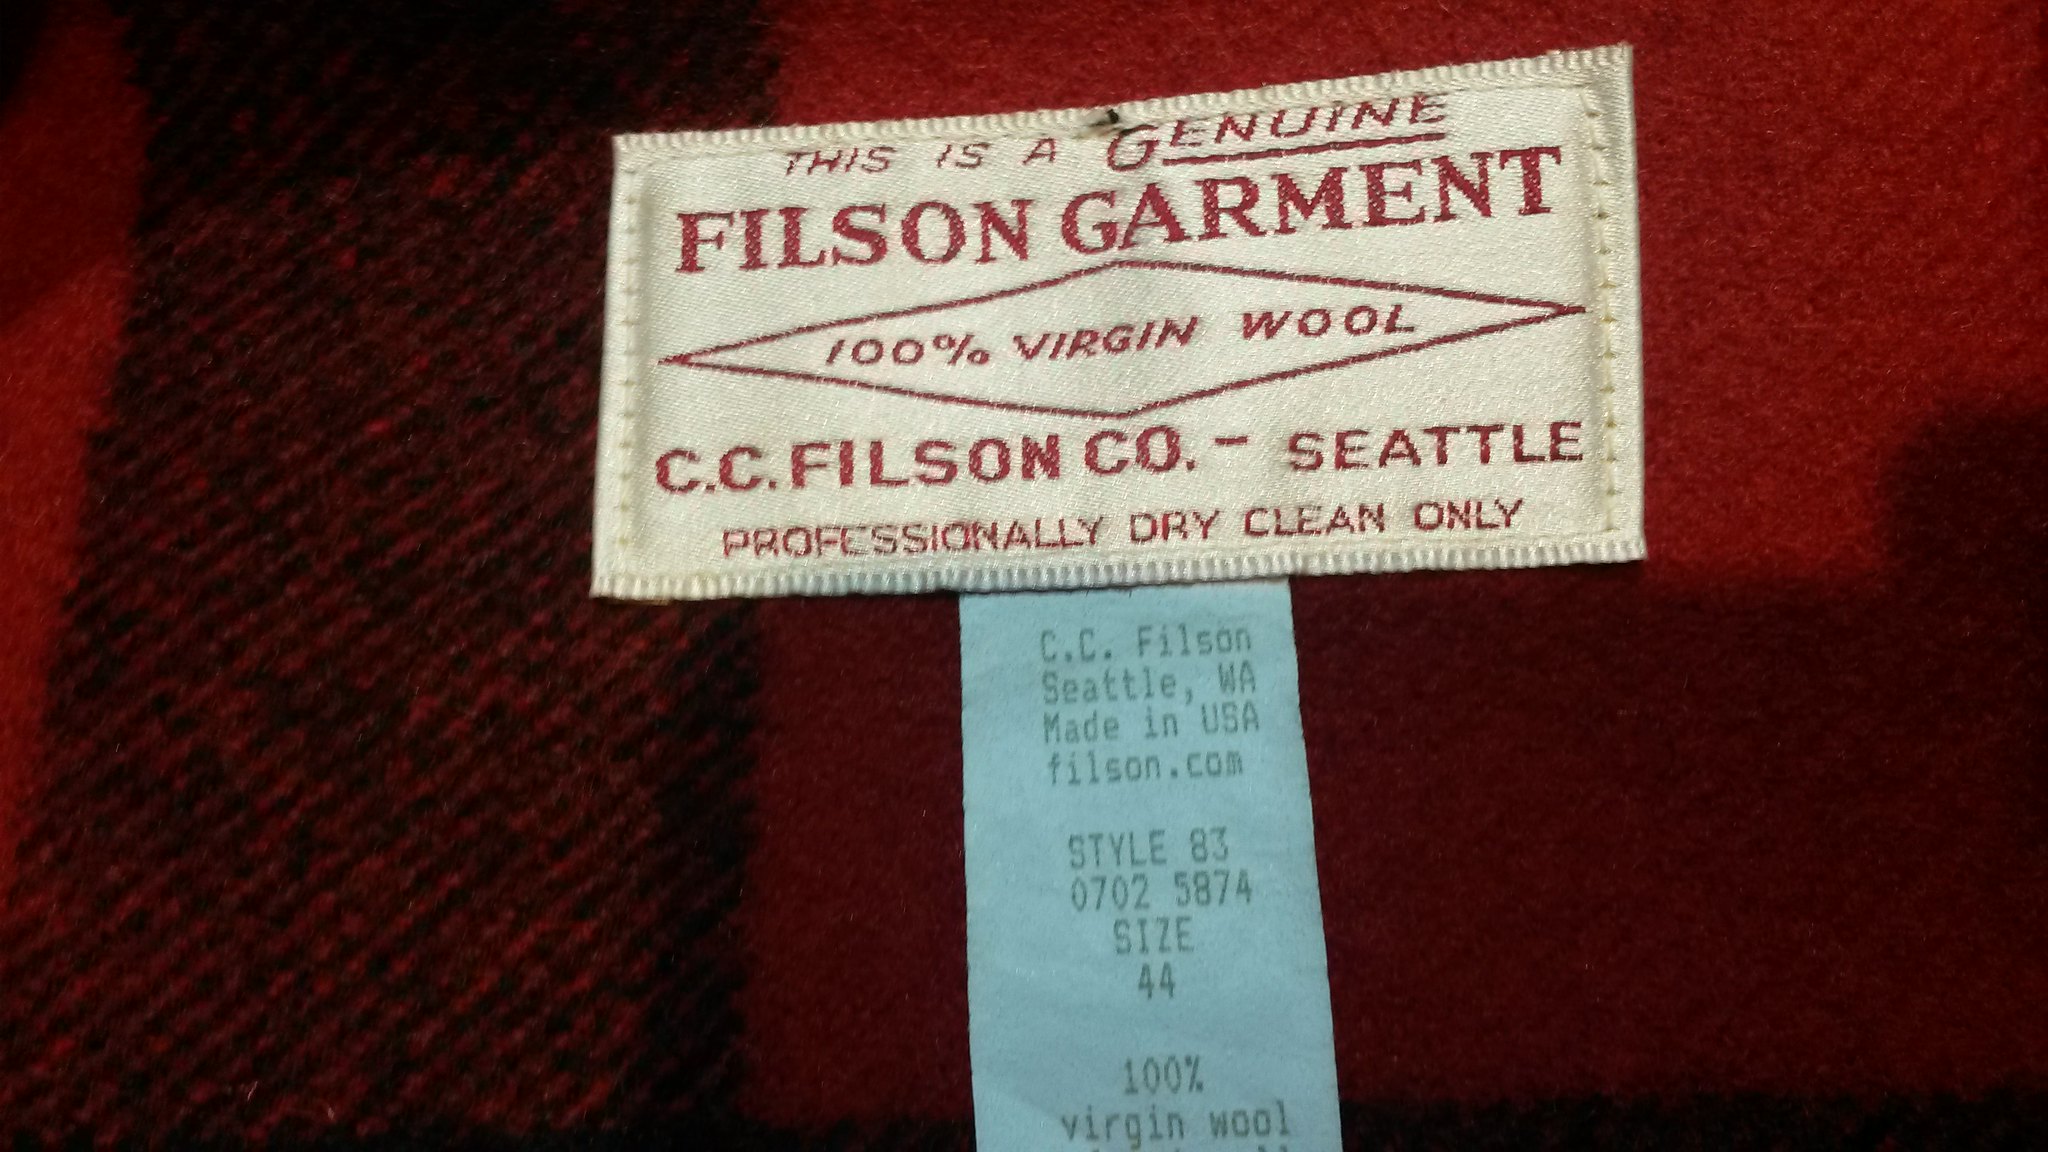 WTS - Filson Double Mackinaw Cruiser in Red/Black, size 44